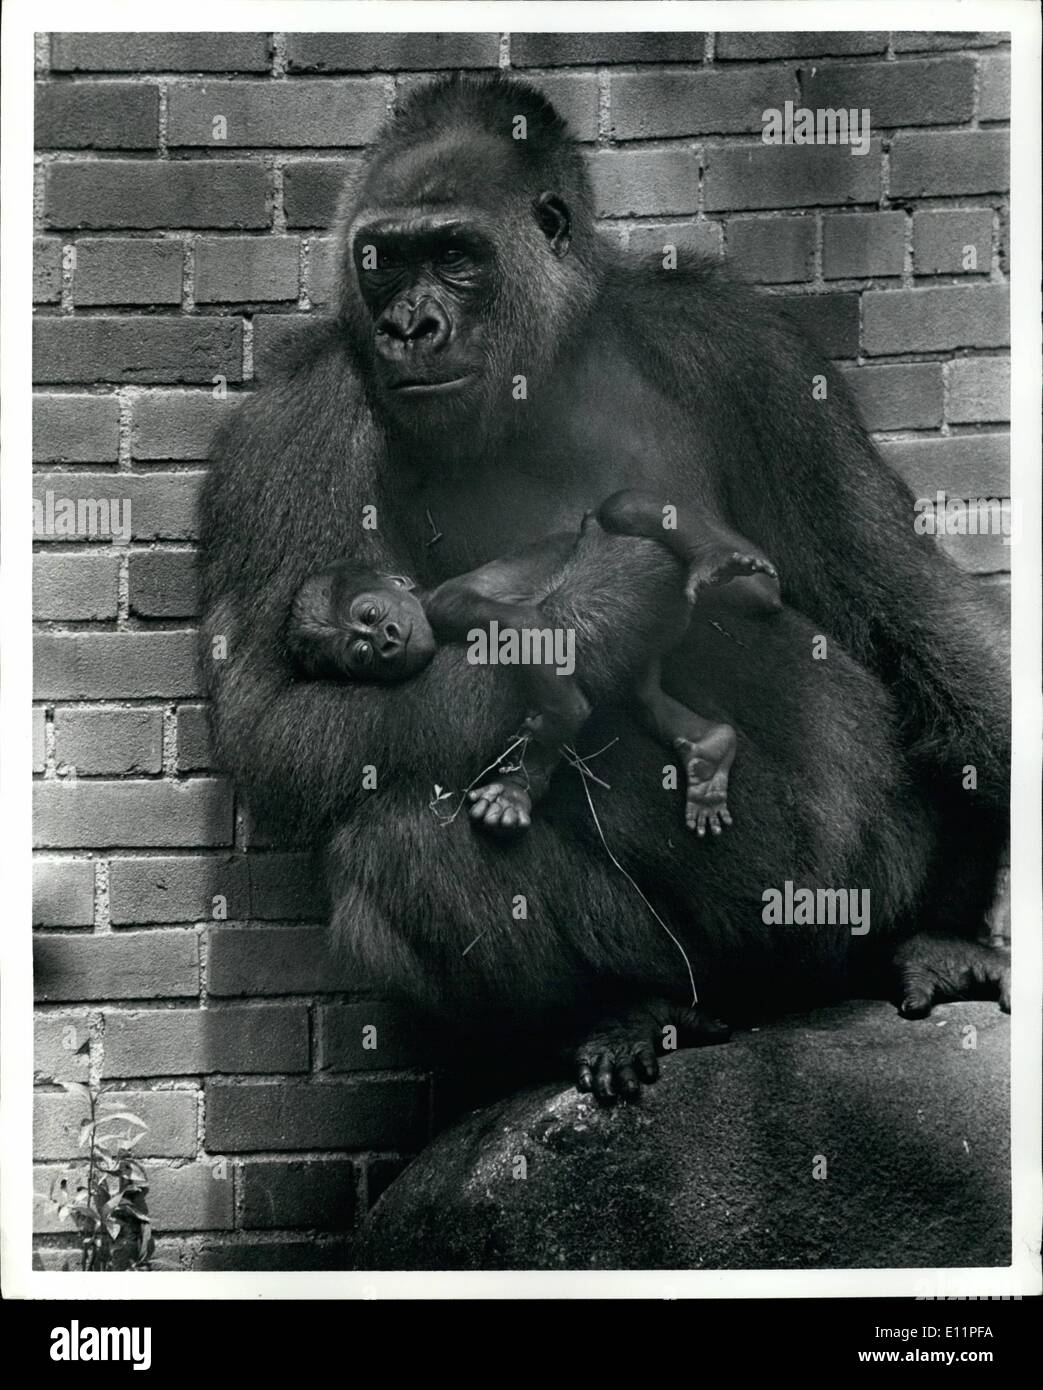 Aug. 08, 1979 - The Bronx zoo, Bronx, New York.: ''But they are all boys!'' Laments the Bronx zoo. of :the two low land female Gorrillas of child bearing age at the zoo, both have given birth to only male Guerrillas. In most households this would be a blessing but for the Bronx zoo, which would like to breed more Gorrillas, it means five males and no females. One female, Sukari has had 2 males and the newest baby Gorrilla born June 19th. Of this year was born to Tunuka who has total of 3 male children. Photo shows Tunuka with her newest son (not yet named) ha was born June 19th Stock Photo